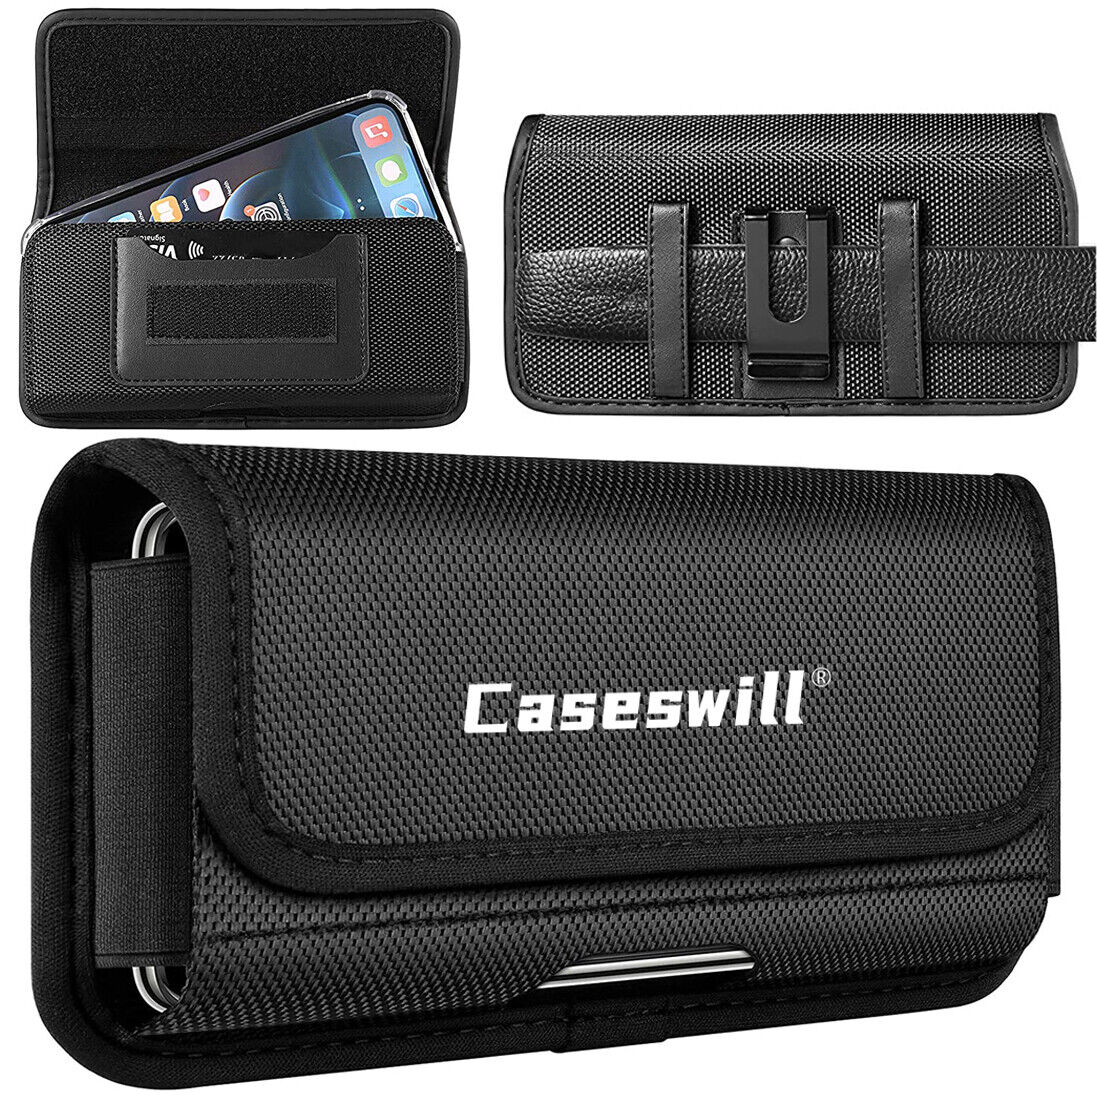 OnePlus Ace 2 5G Case Rugged Nylon Belt Clip Holster Carrying Pouch